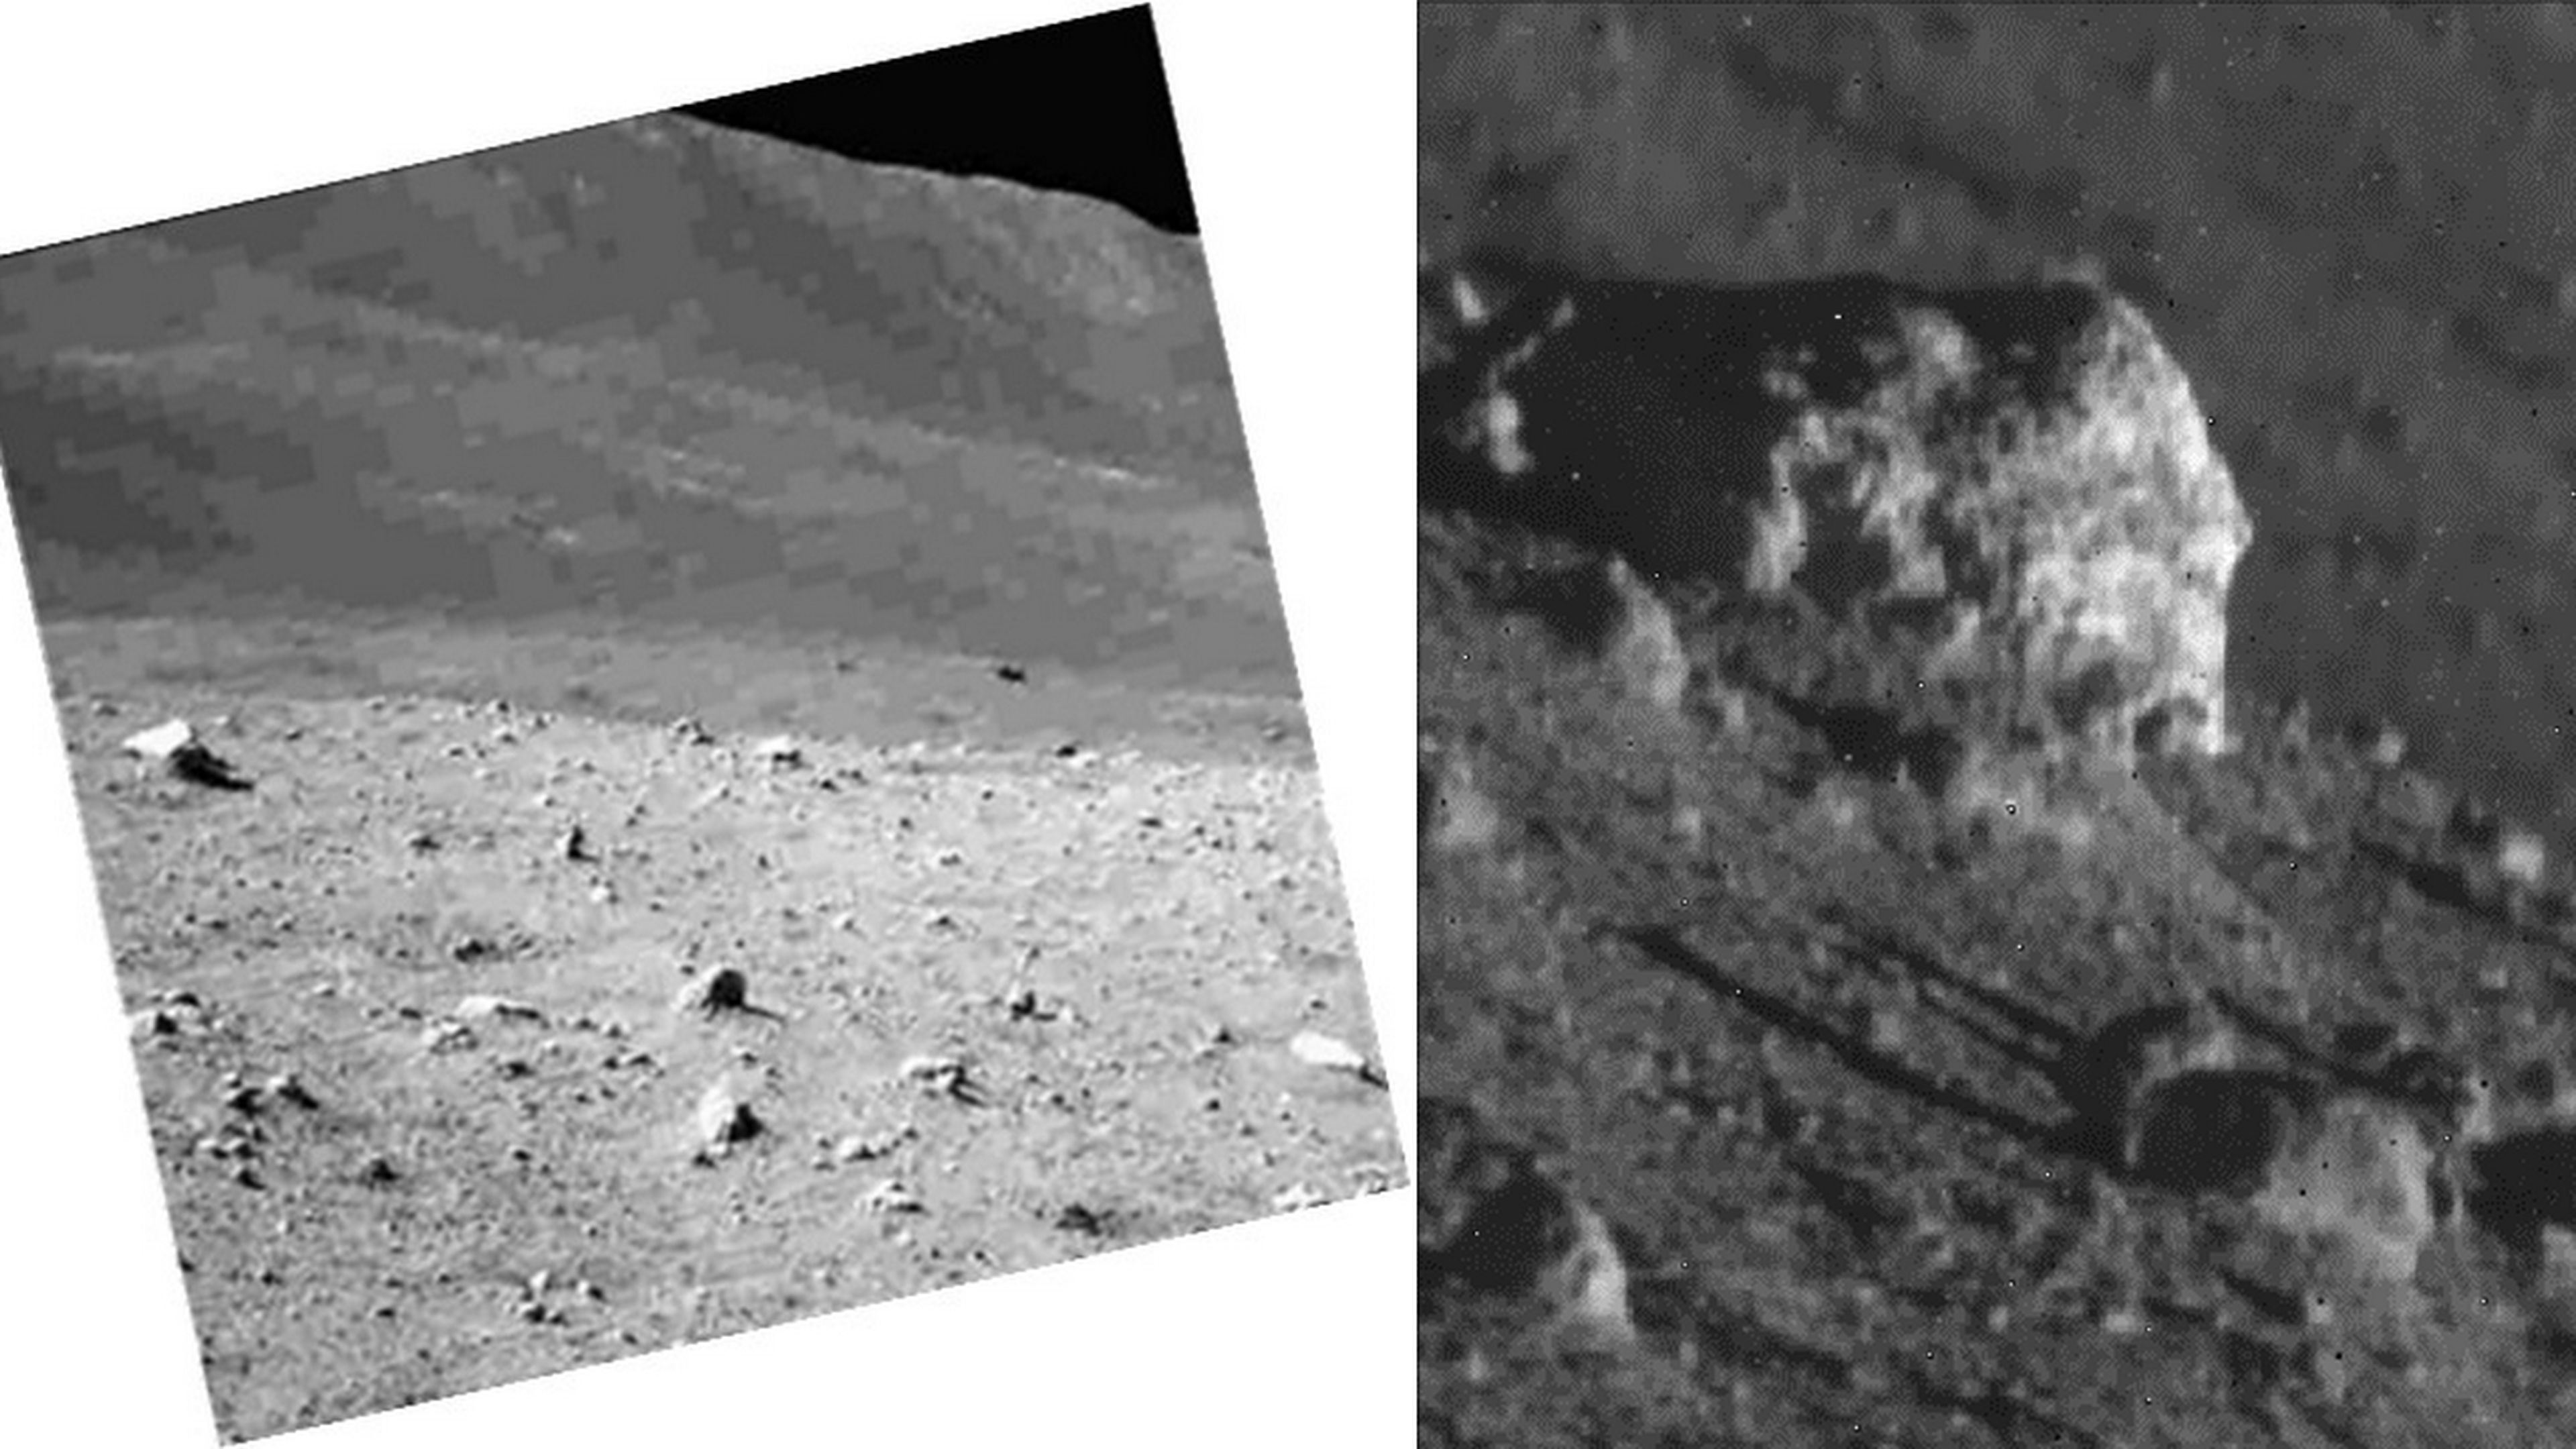 With its head down, the Japanese lunar module continues to photograph and experiment on the Moon